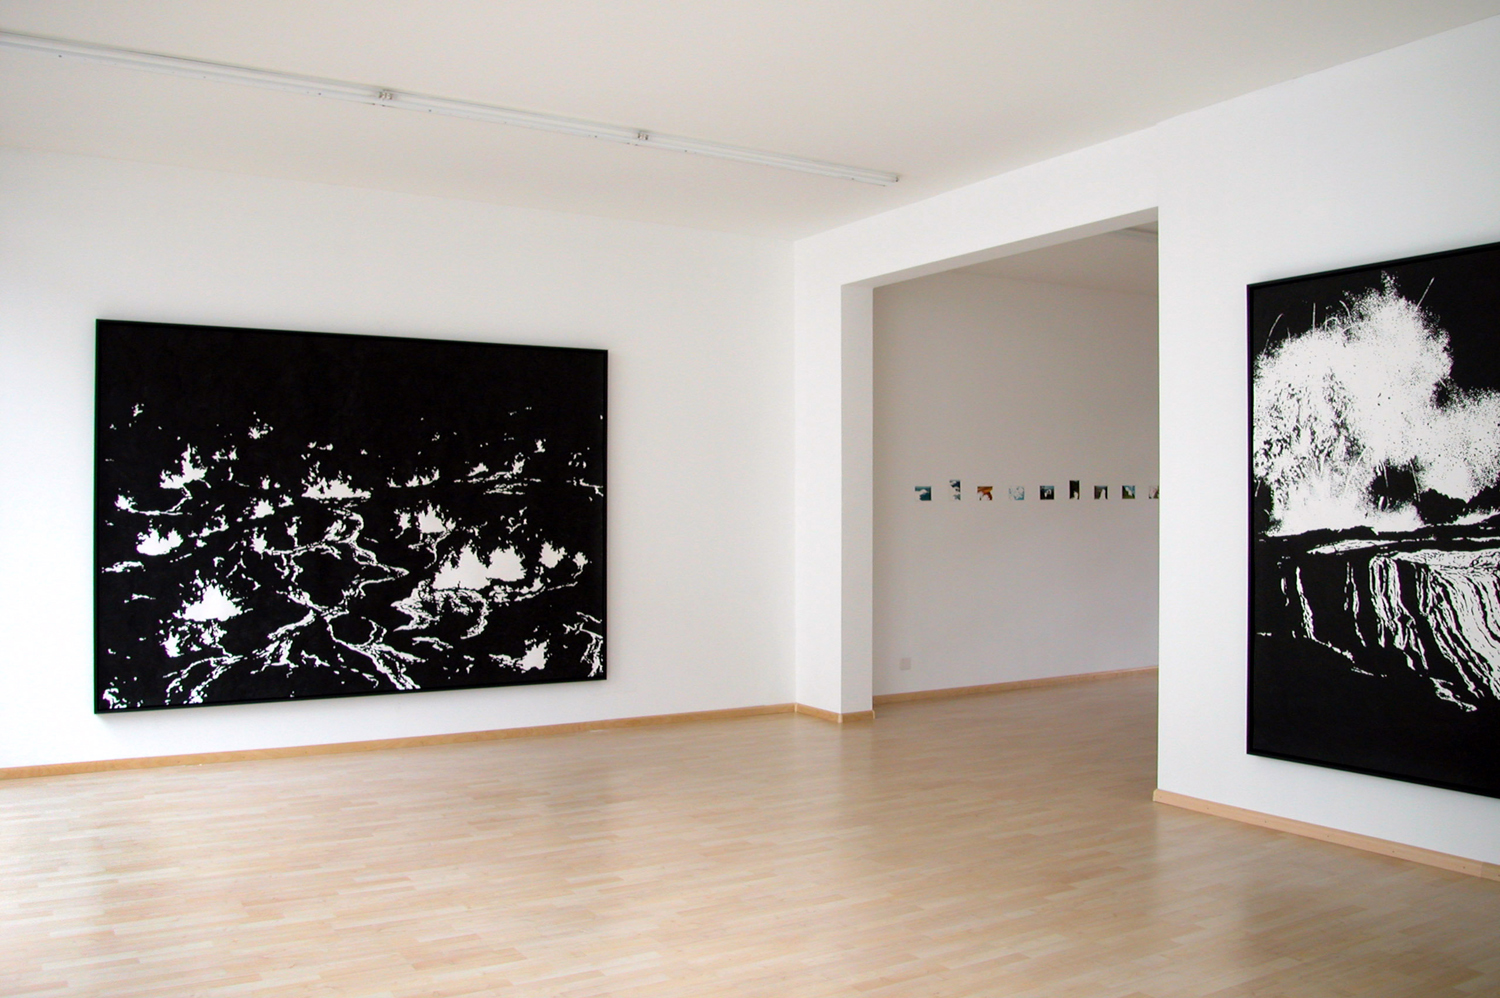   ground ll, ground l,  2004, ink on paper, 196 x 276cm  solid tremors, 2004, Galerie Friedrich, Basel 